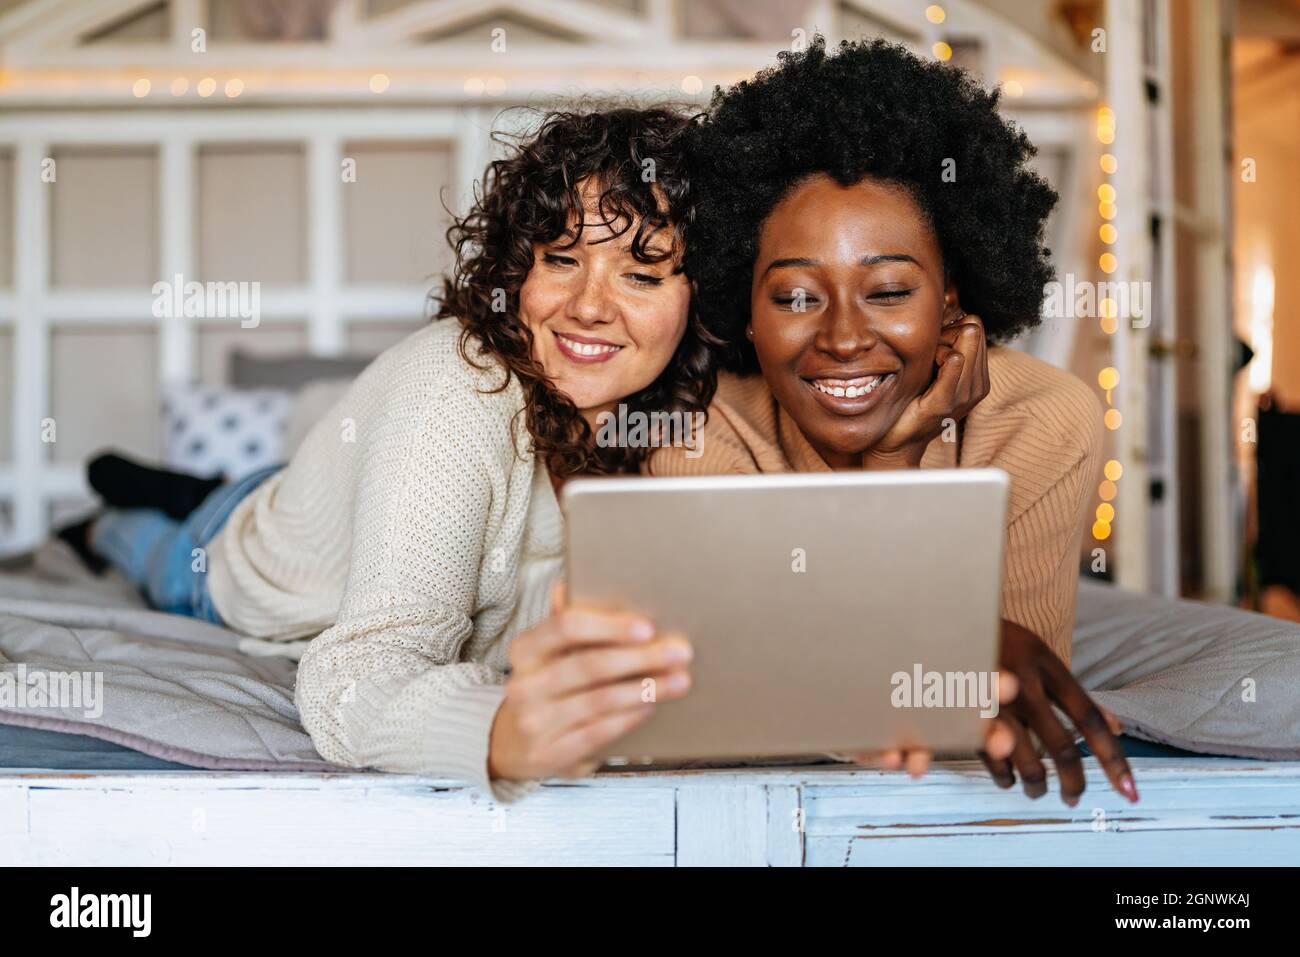 Beautiful happy gay couple having fun and good time together with tablet at home Stock Photo